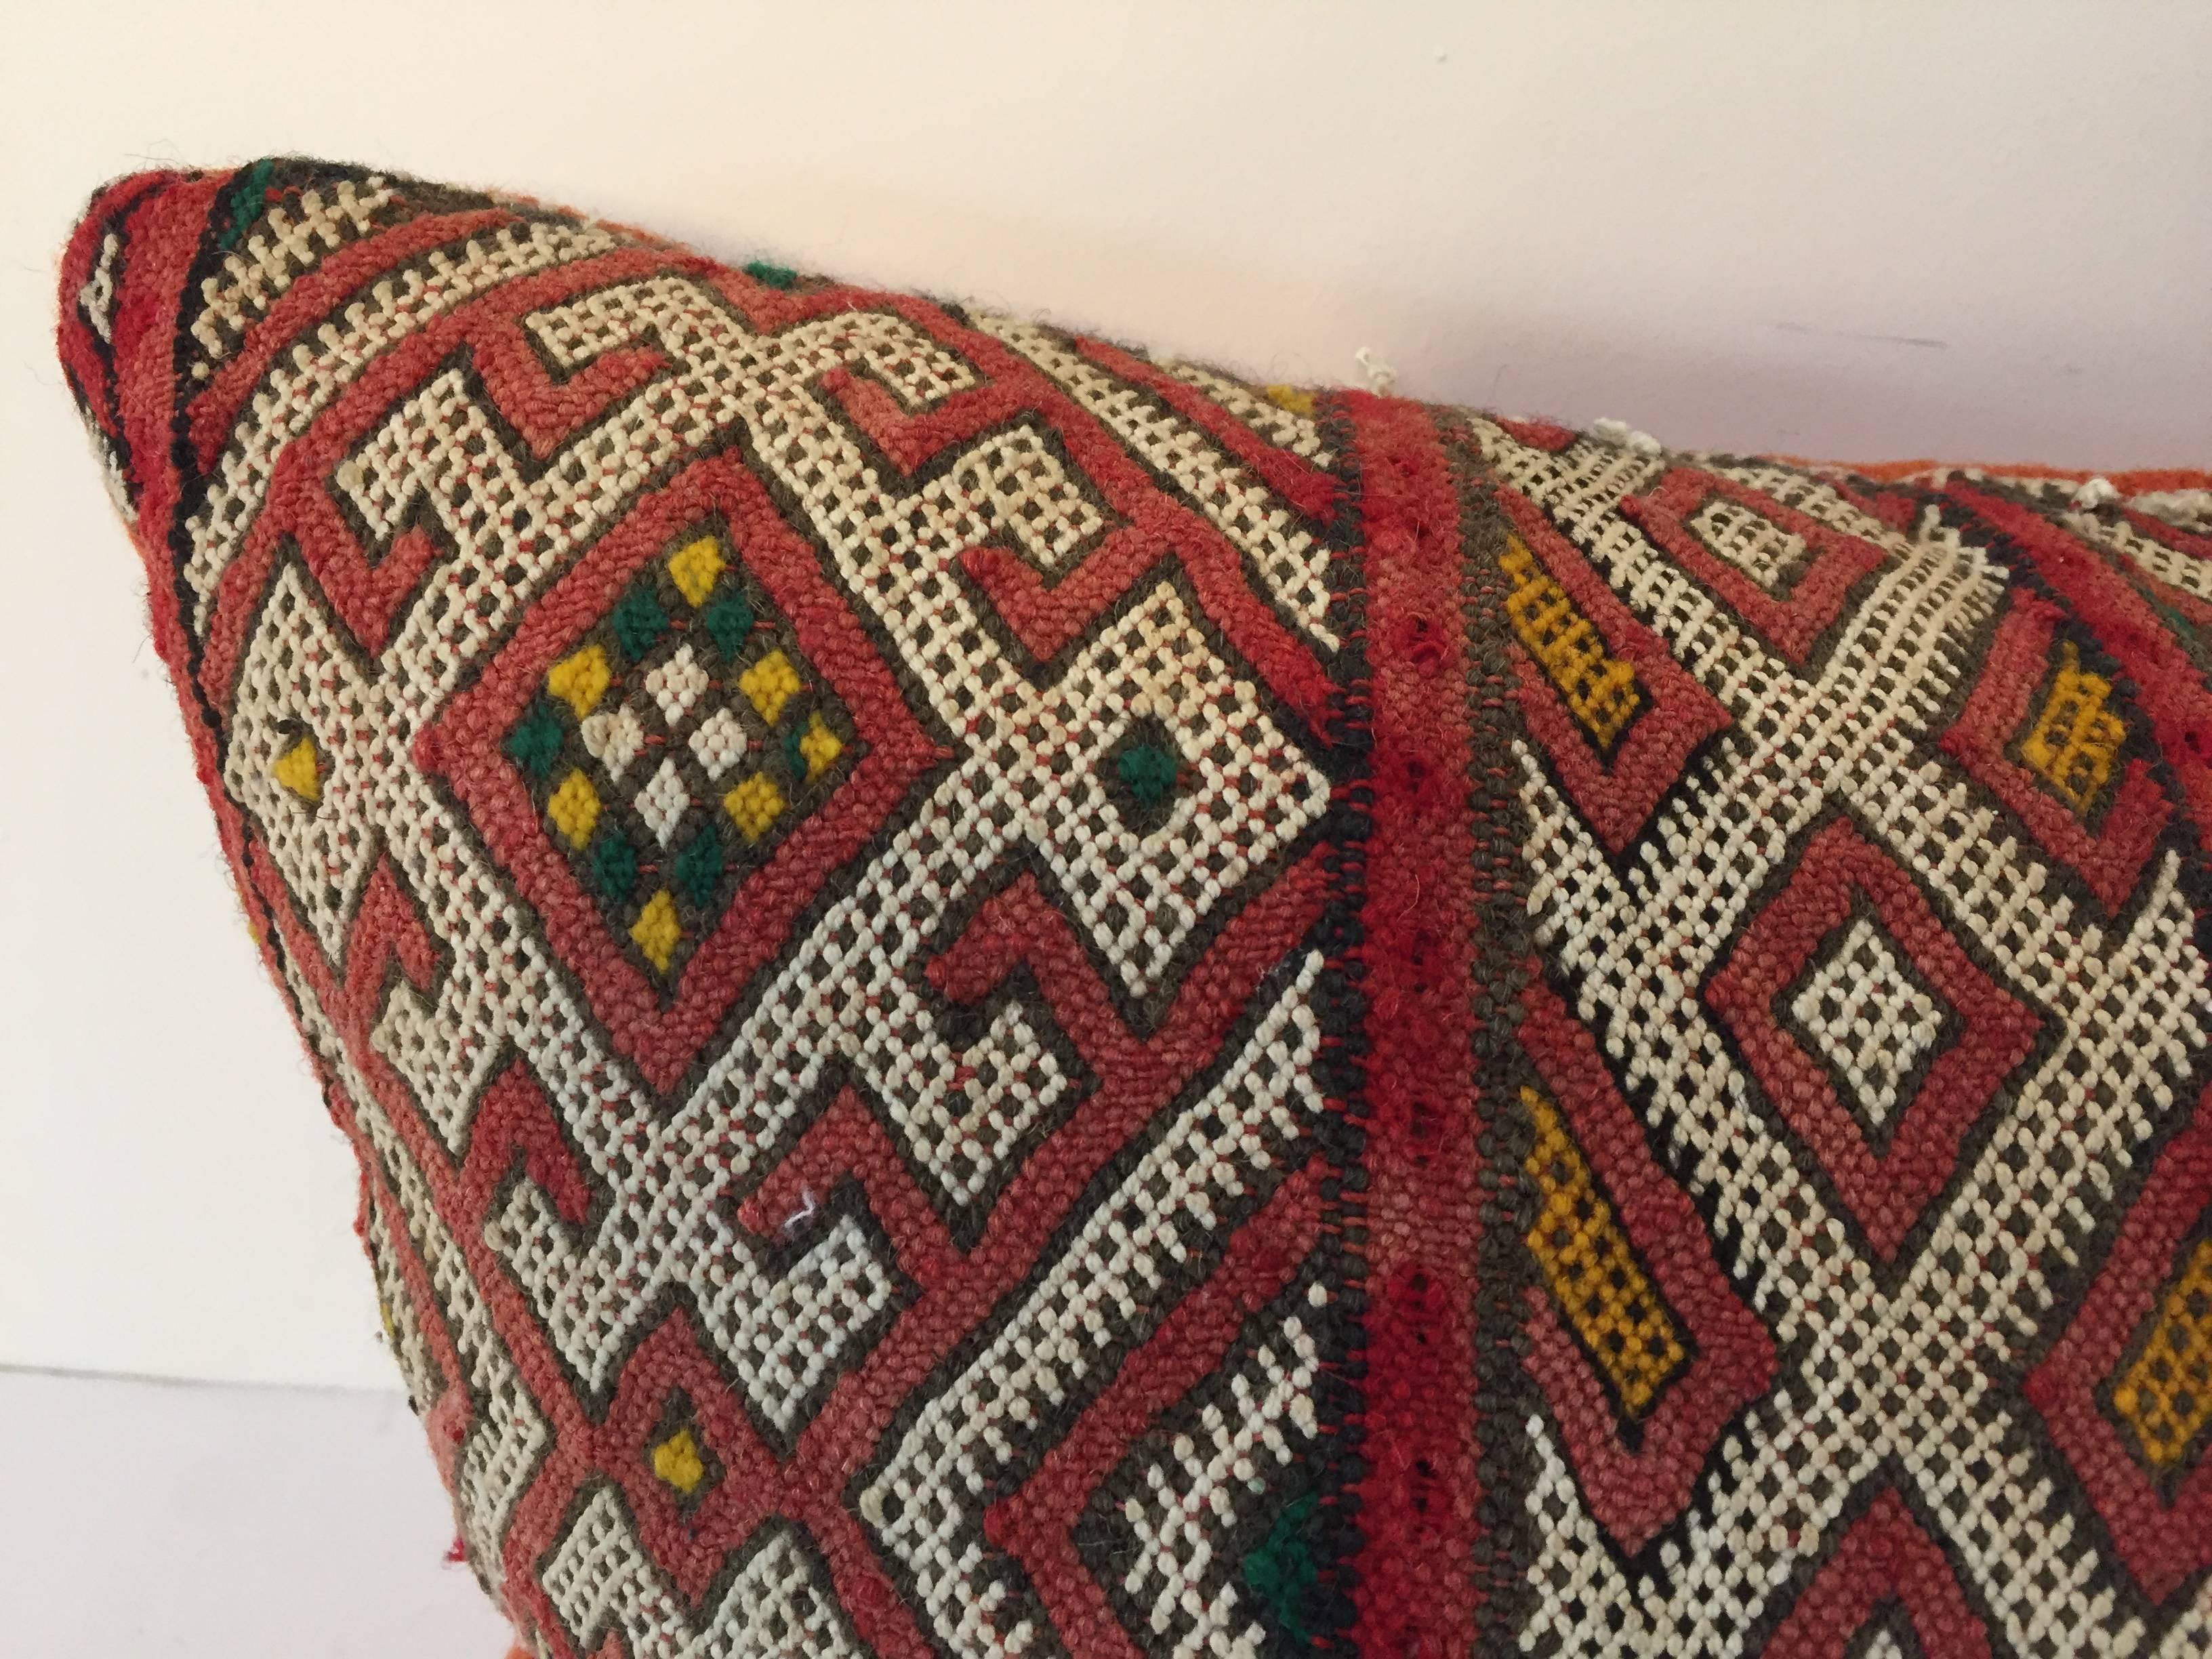 Hand-Woven Moroccan Red Berber Tribal Pillow with African Designs